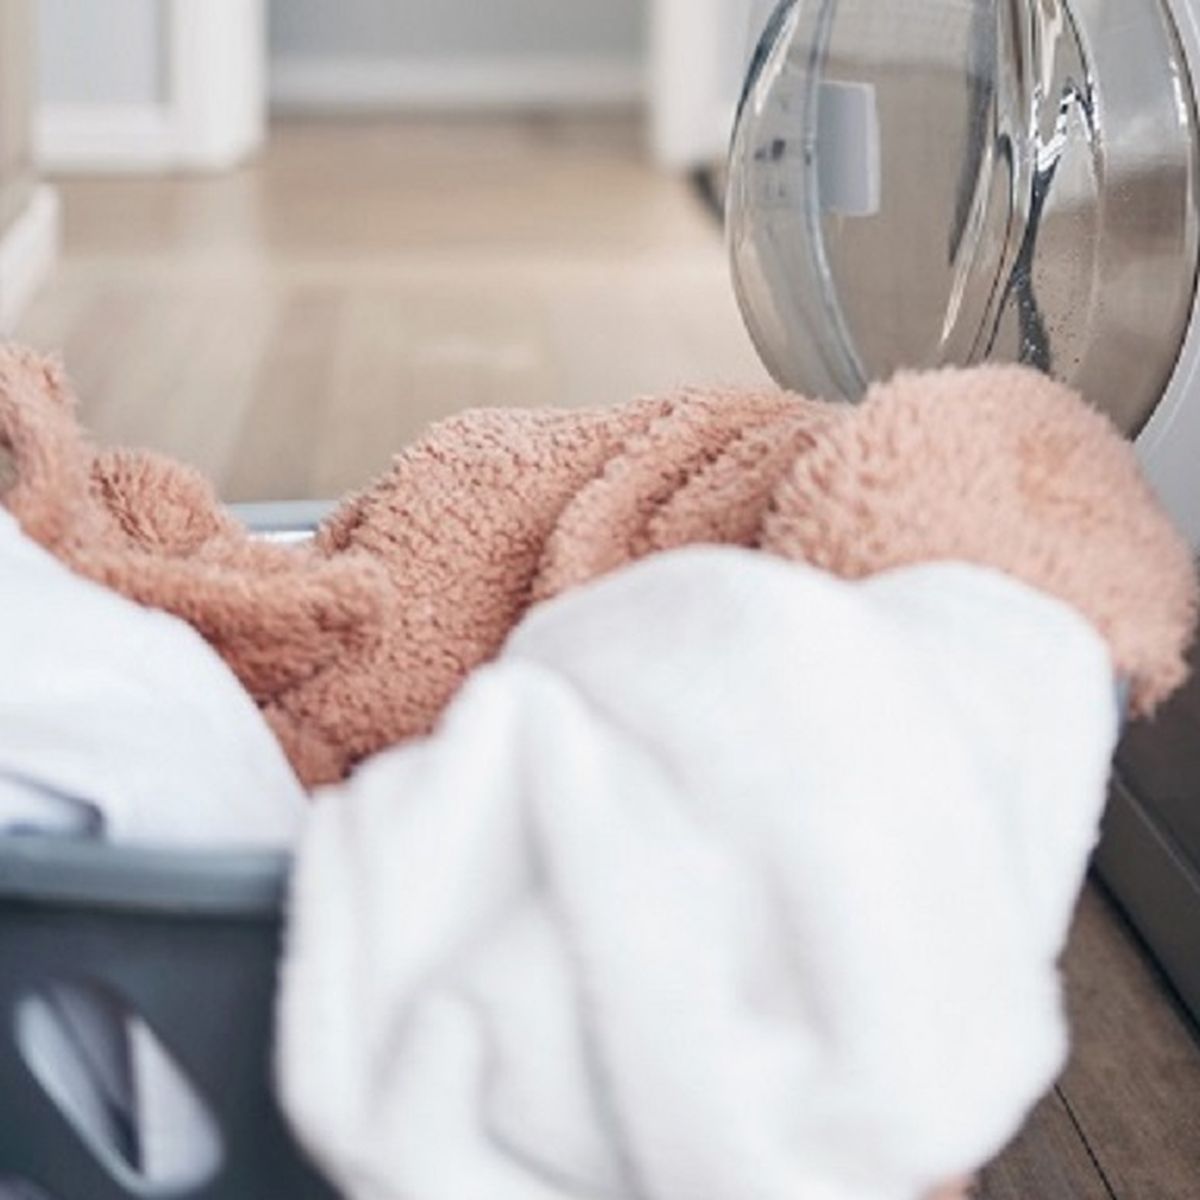 Bedsheets, pyjamas and underwear - this is how often to wash your most  intimate laundry - Surrey Live